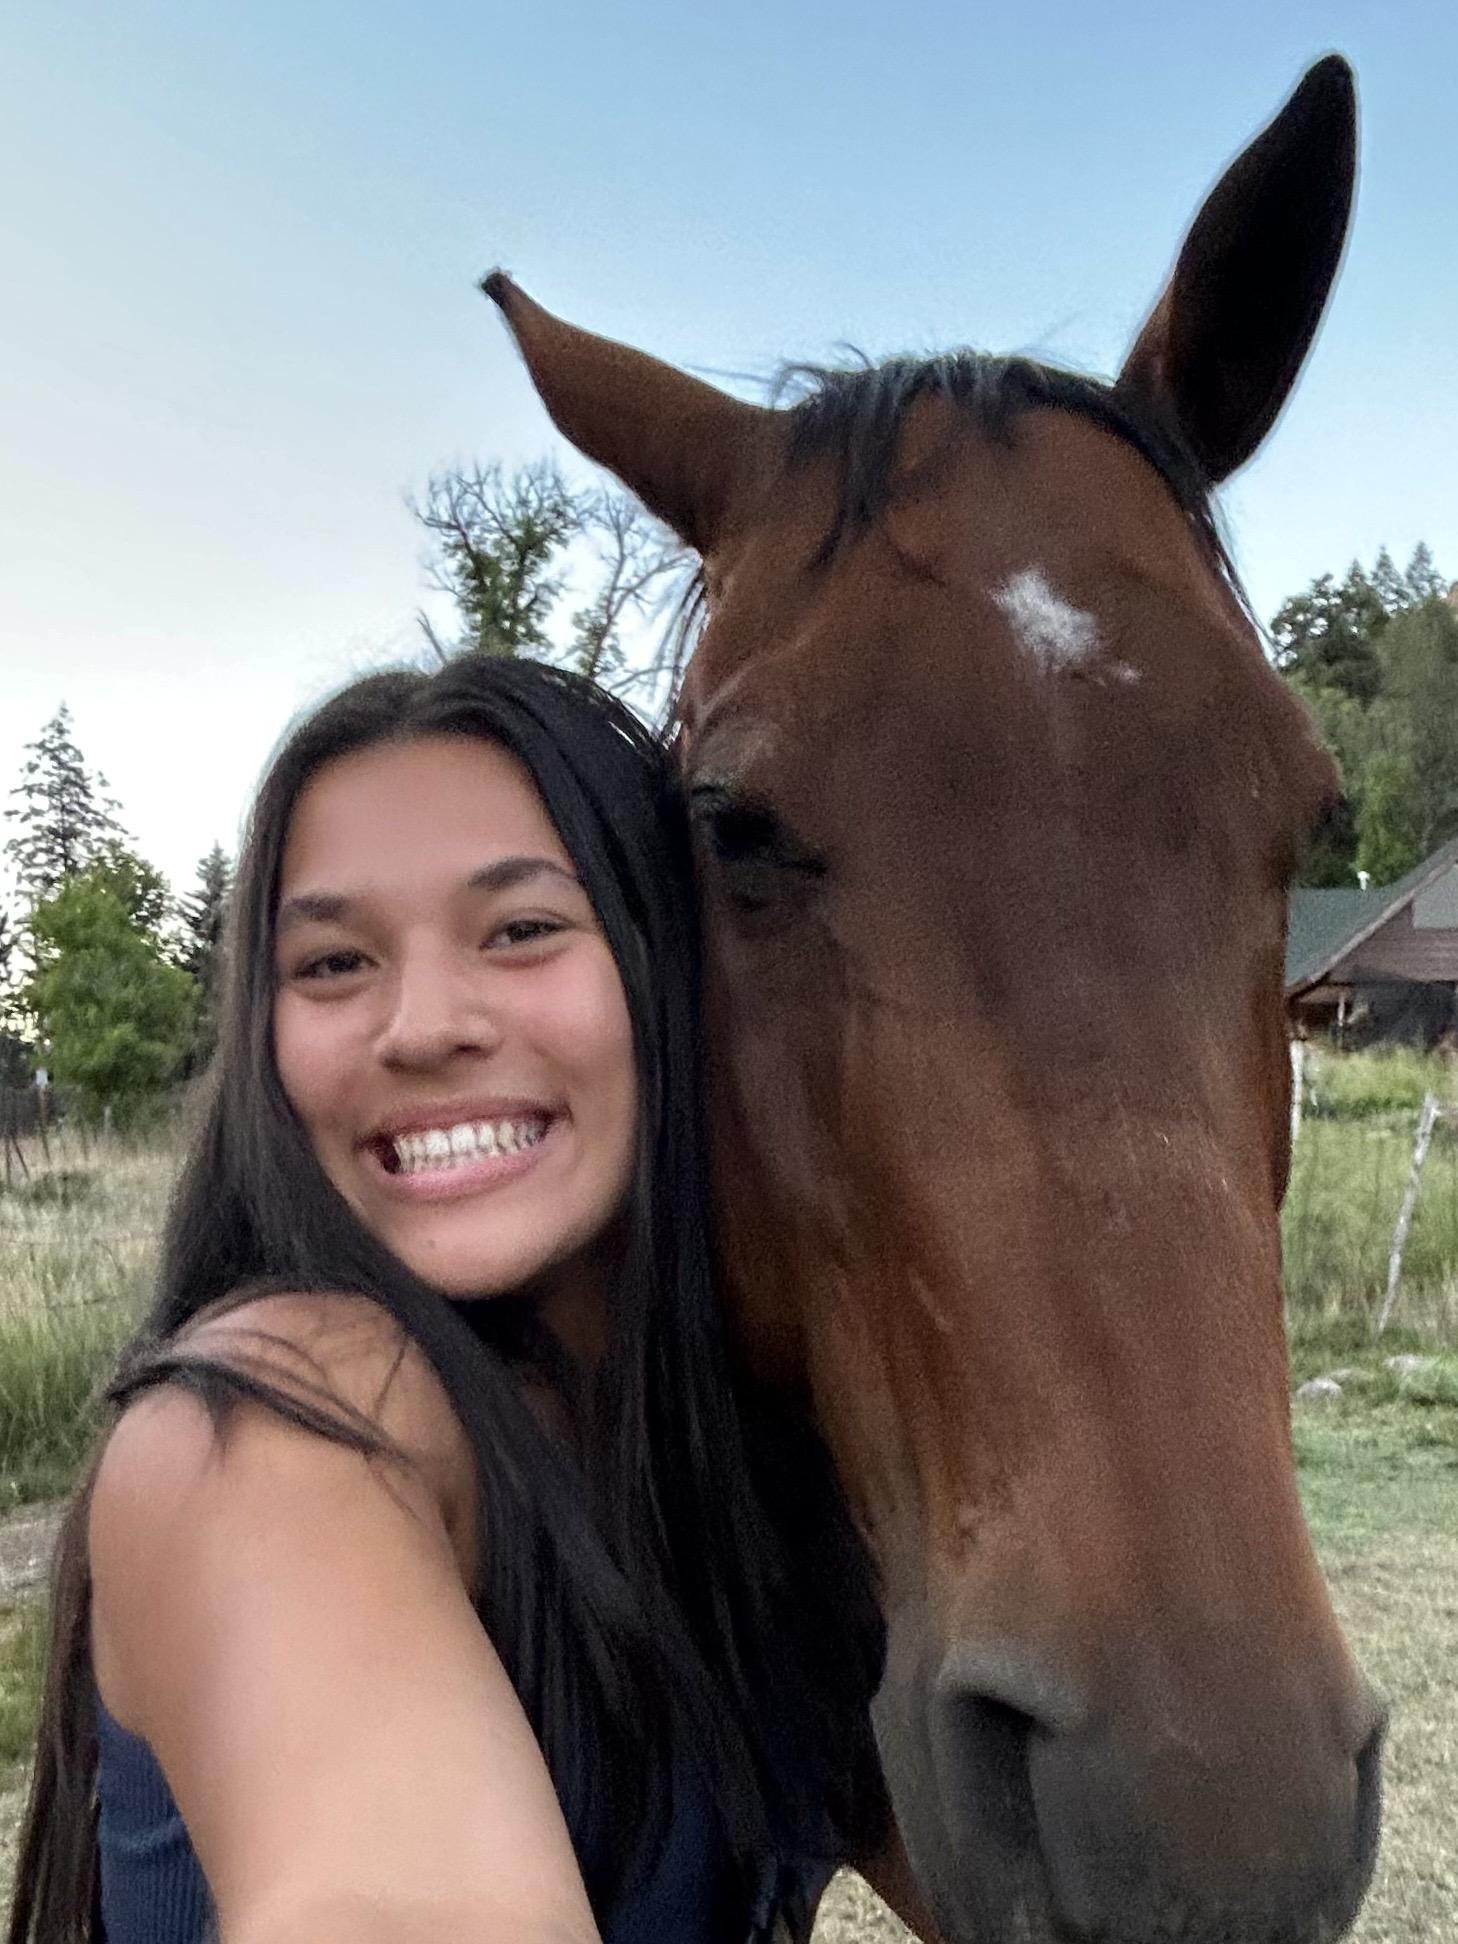 Lexi Urbanz. Joyful student standing eye level with a handsome brown horse.